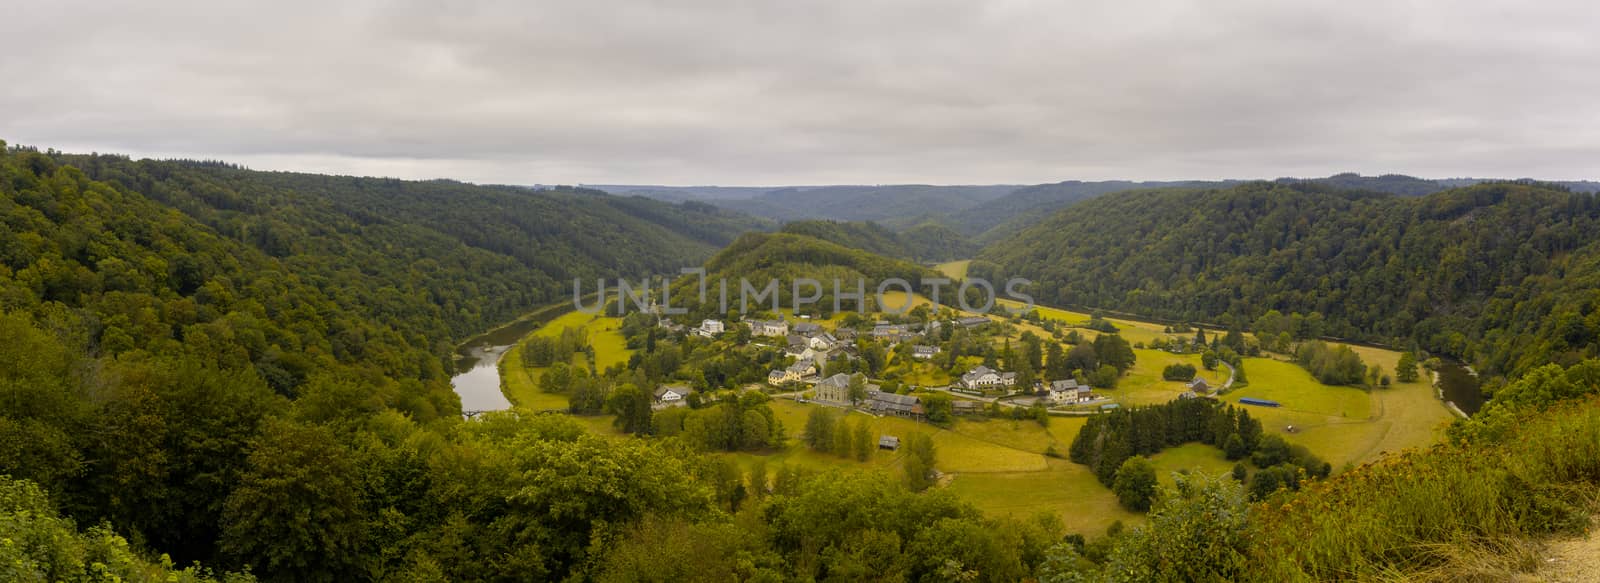 Panorama view Frahan valley and Semois river from viewpoint Rochehaut, Bouillon, Wallonia, Belgium by kb79